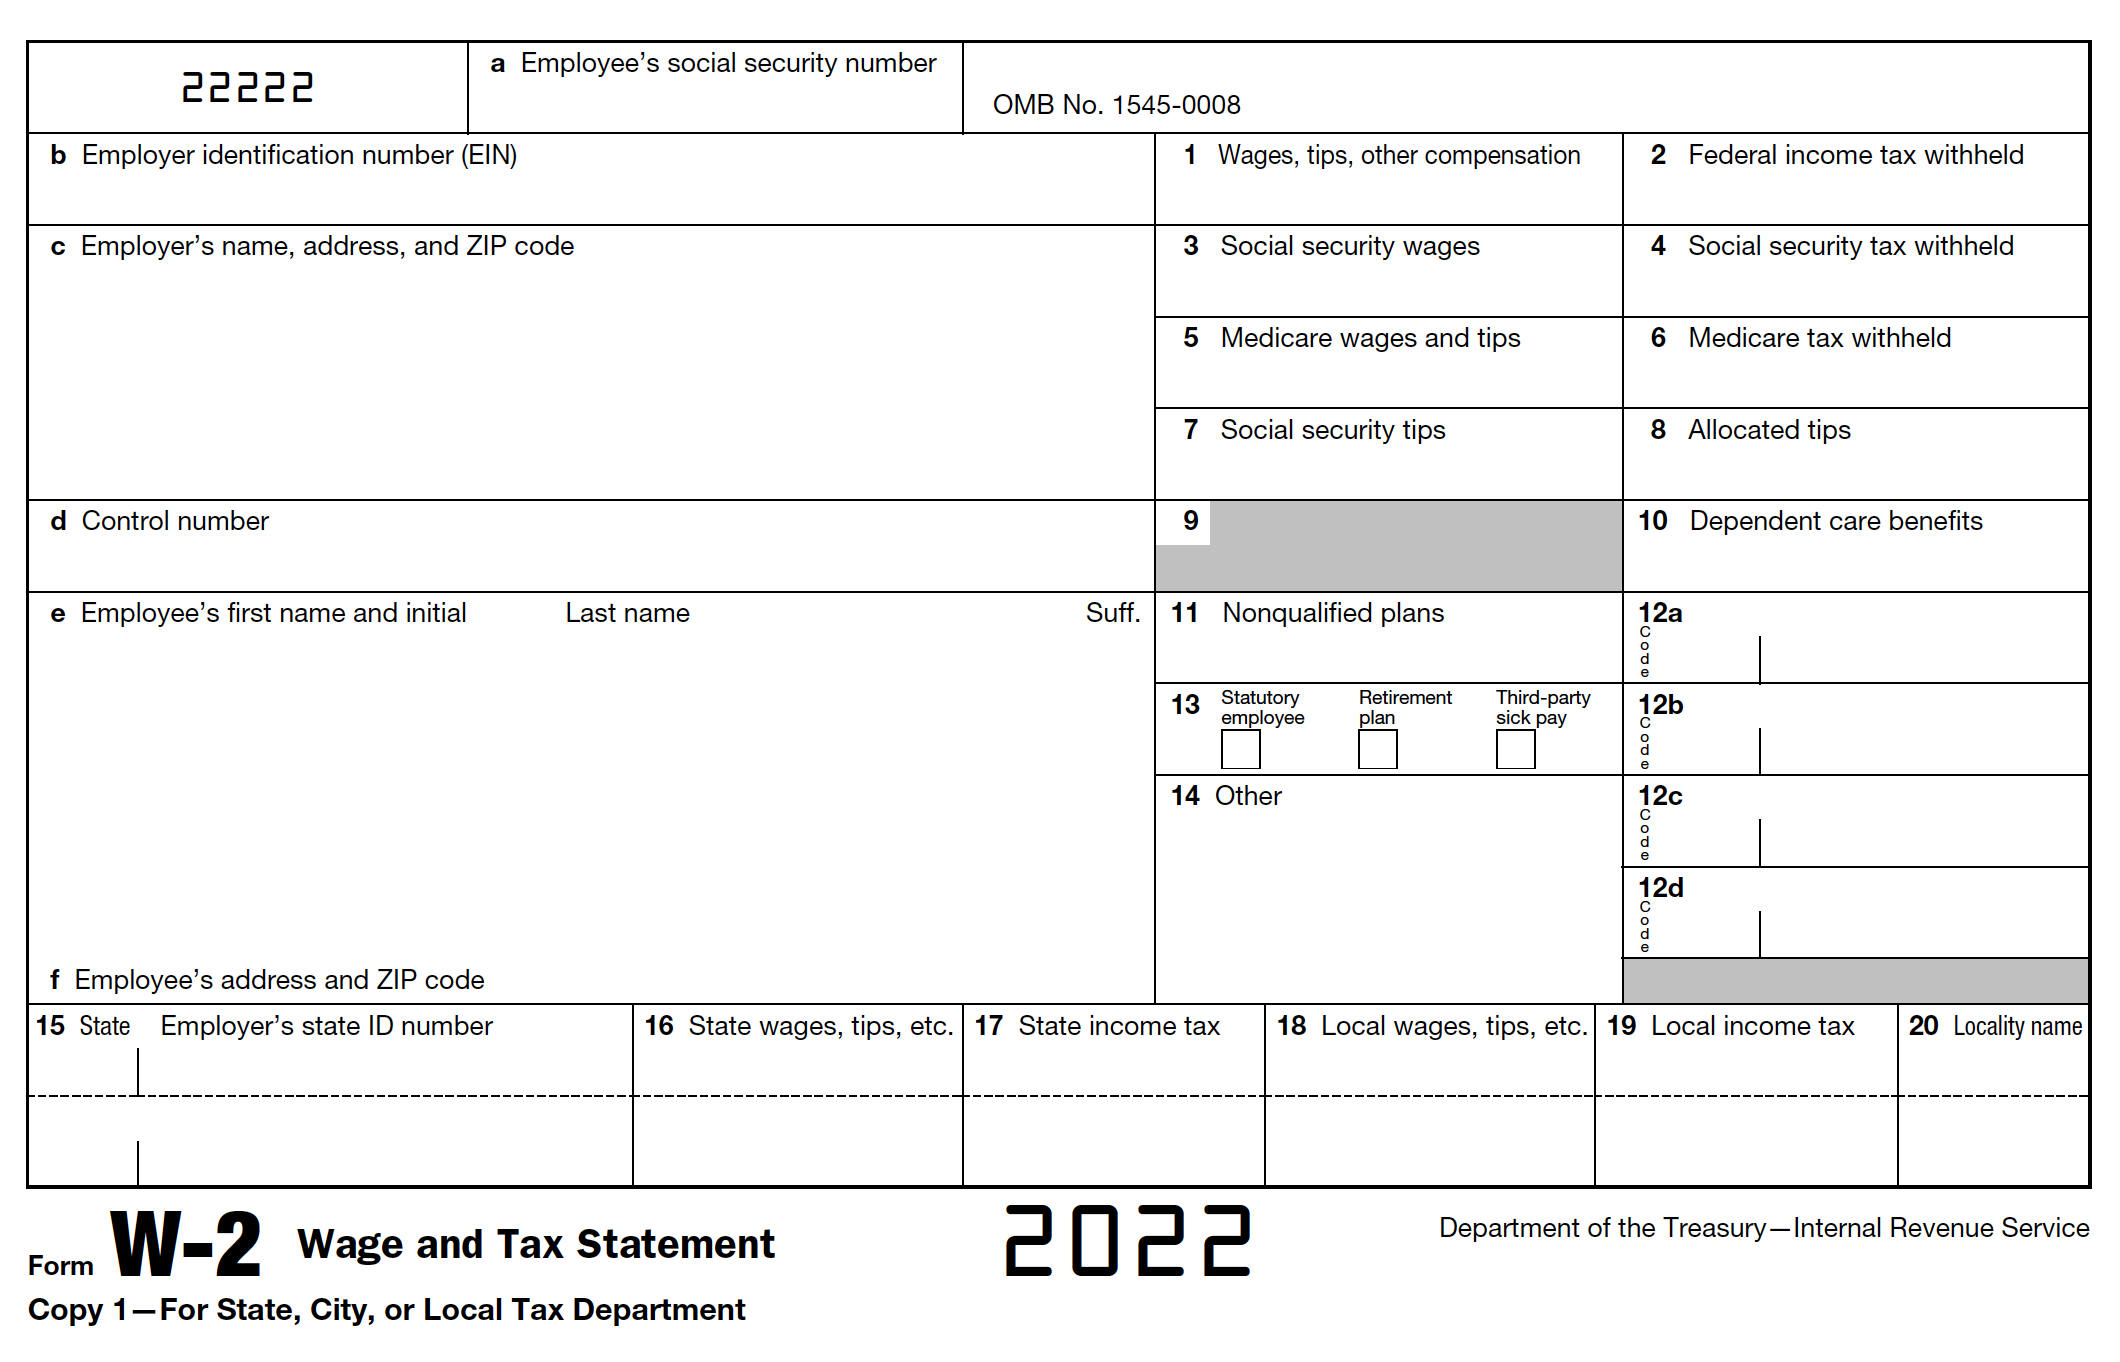 How To Read A W-2 In 2022: An Easy Box-By-Box Breakdown - Blue Lion intended for Box 14 On W2 Form